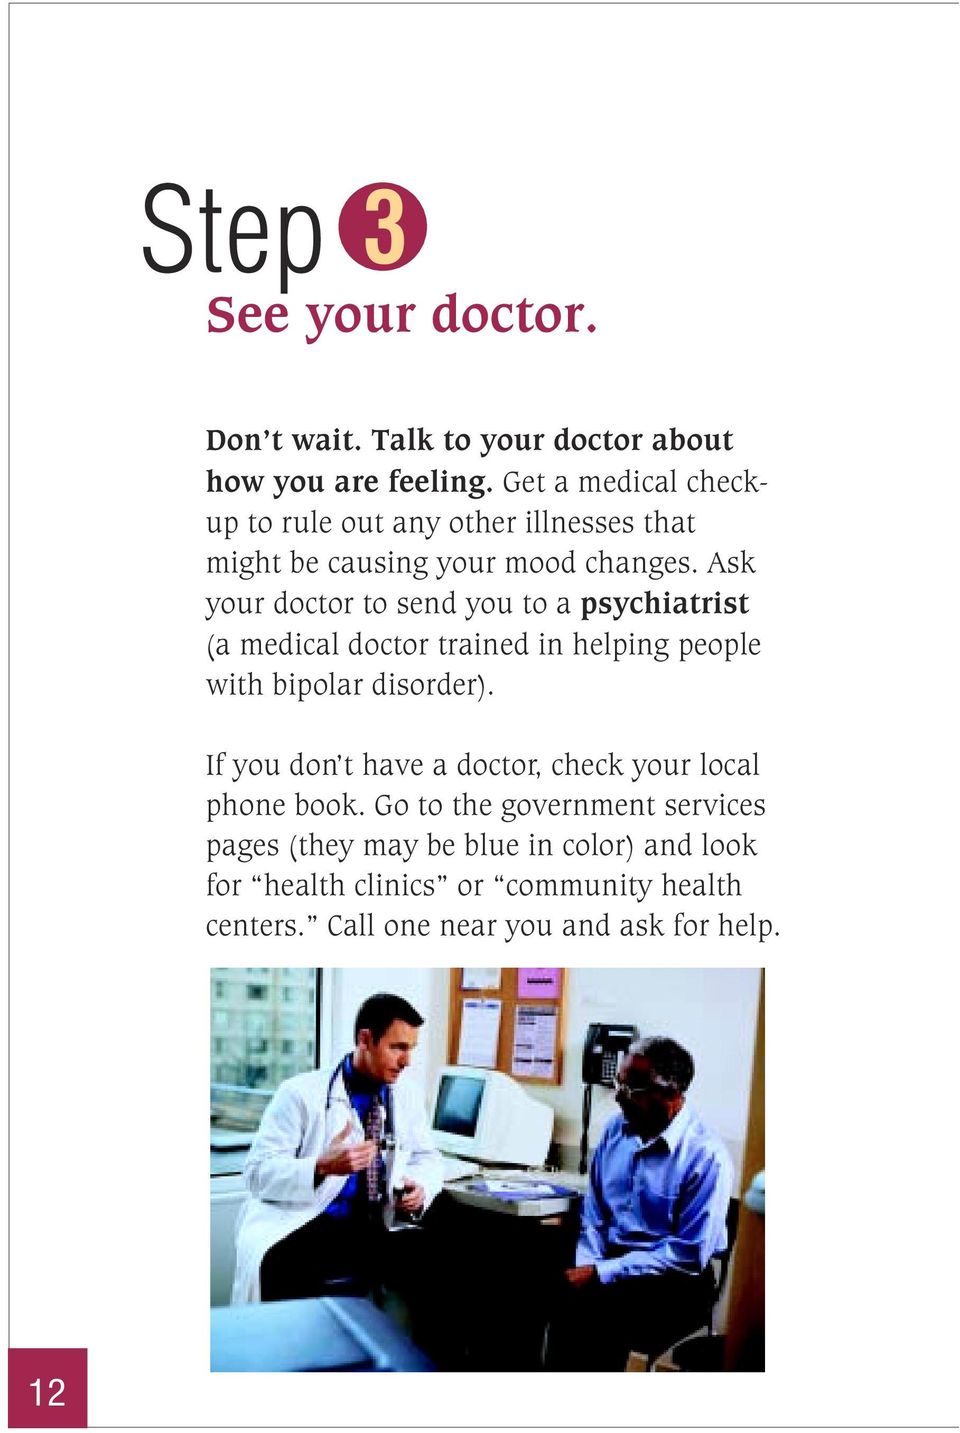 Ask your doctor to send you to a psychiatrist (a medical doctor trained in helping people with bipolar disorder).